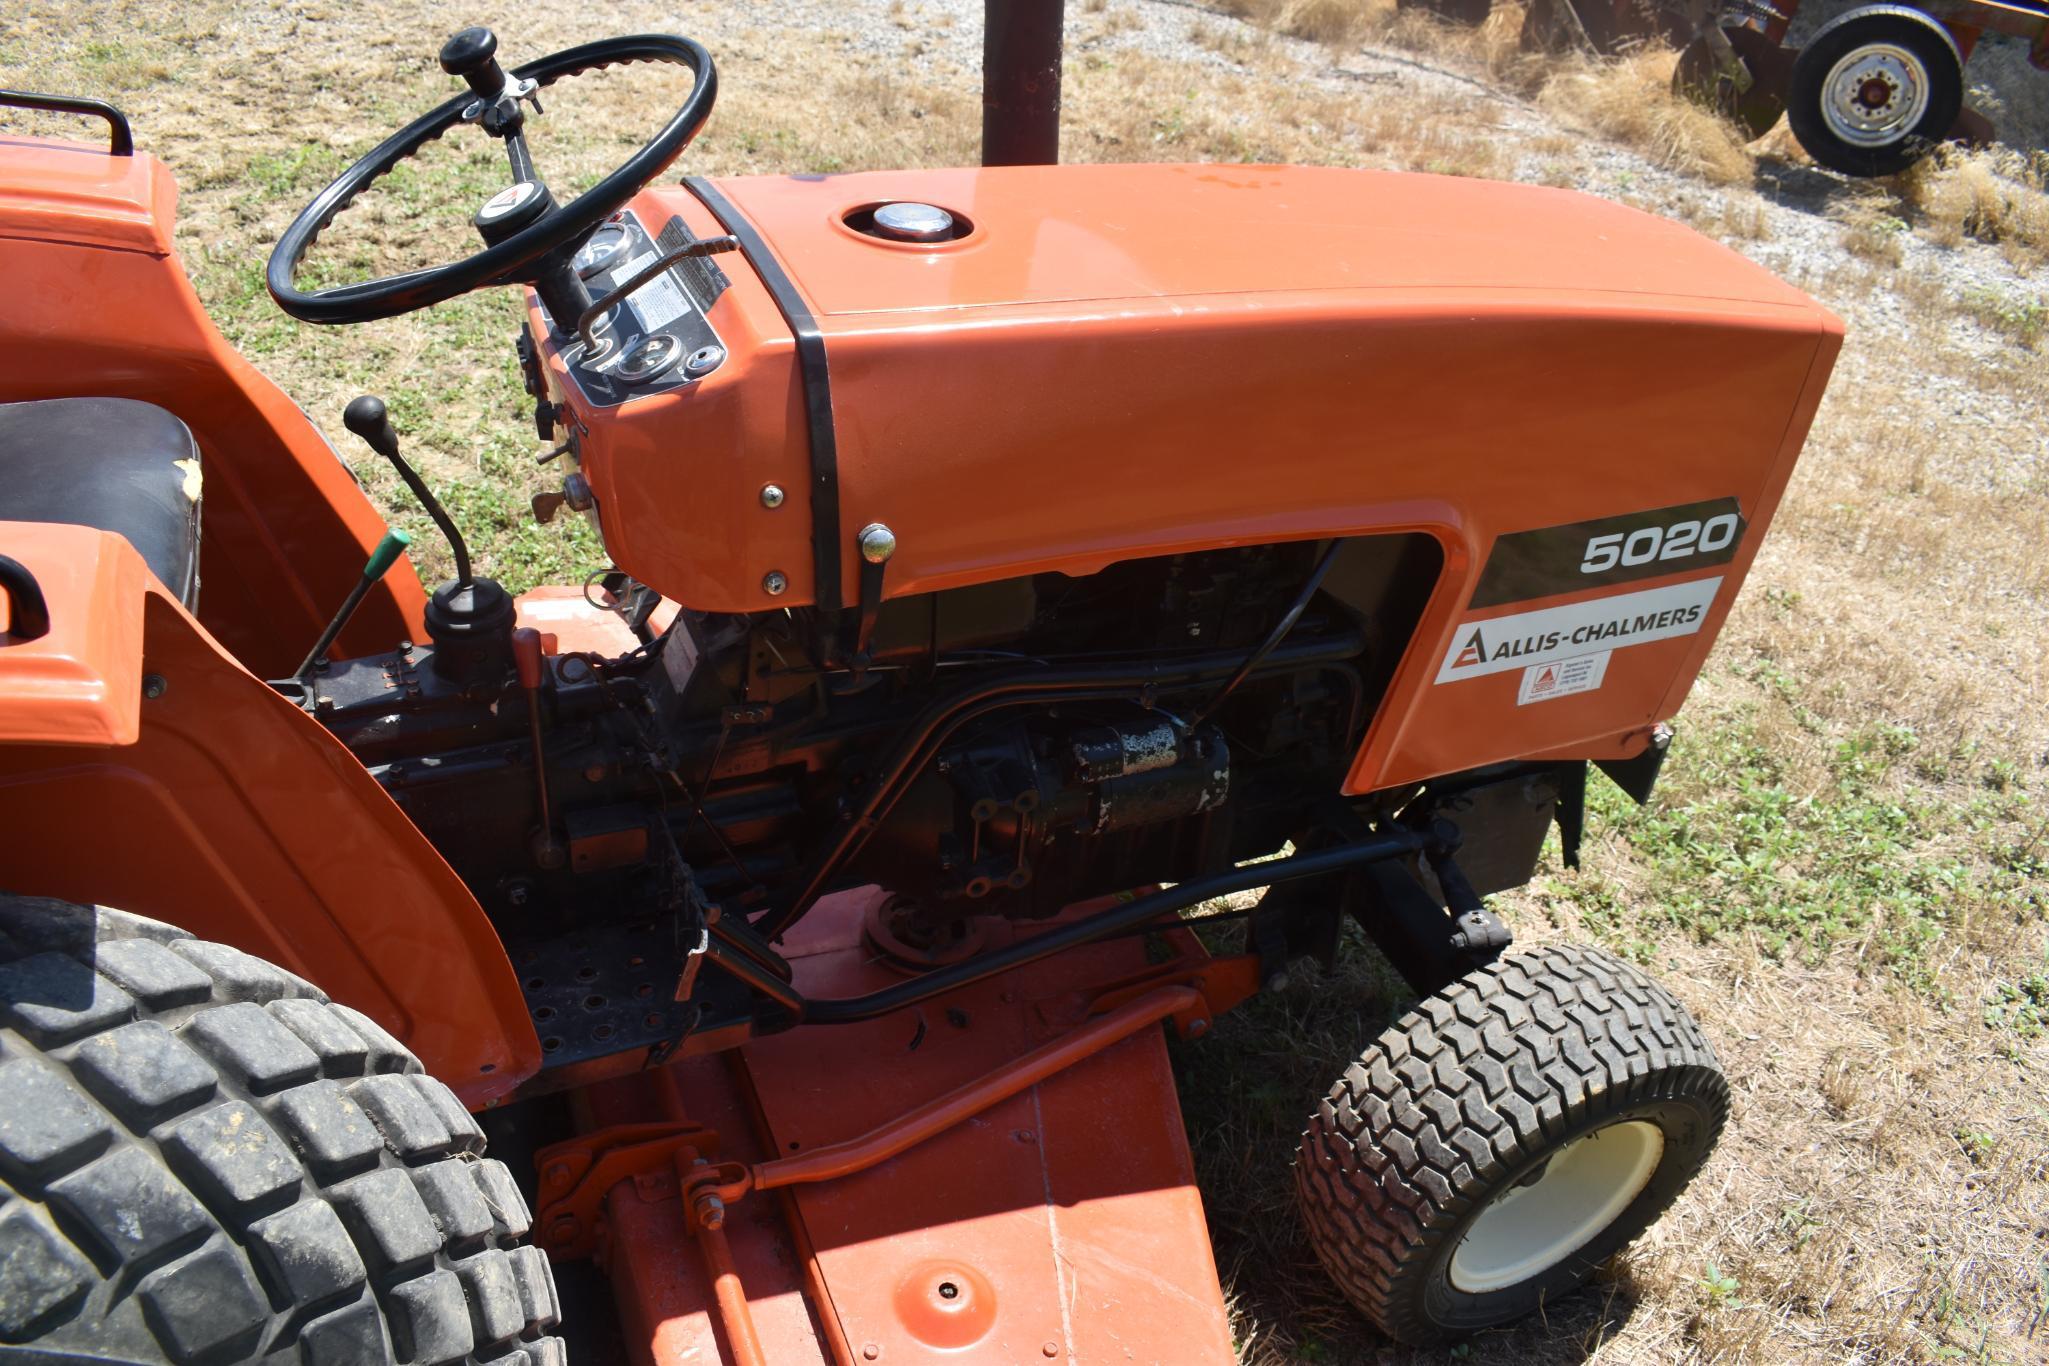 1980 Allis-Chalmers 5020 2wd tractor